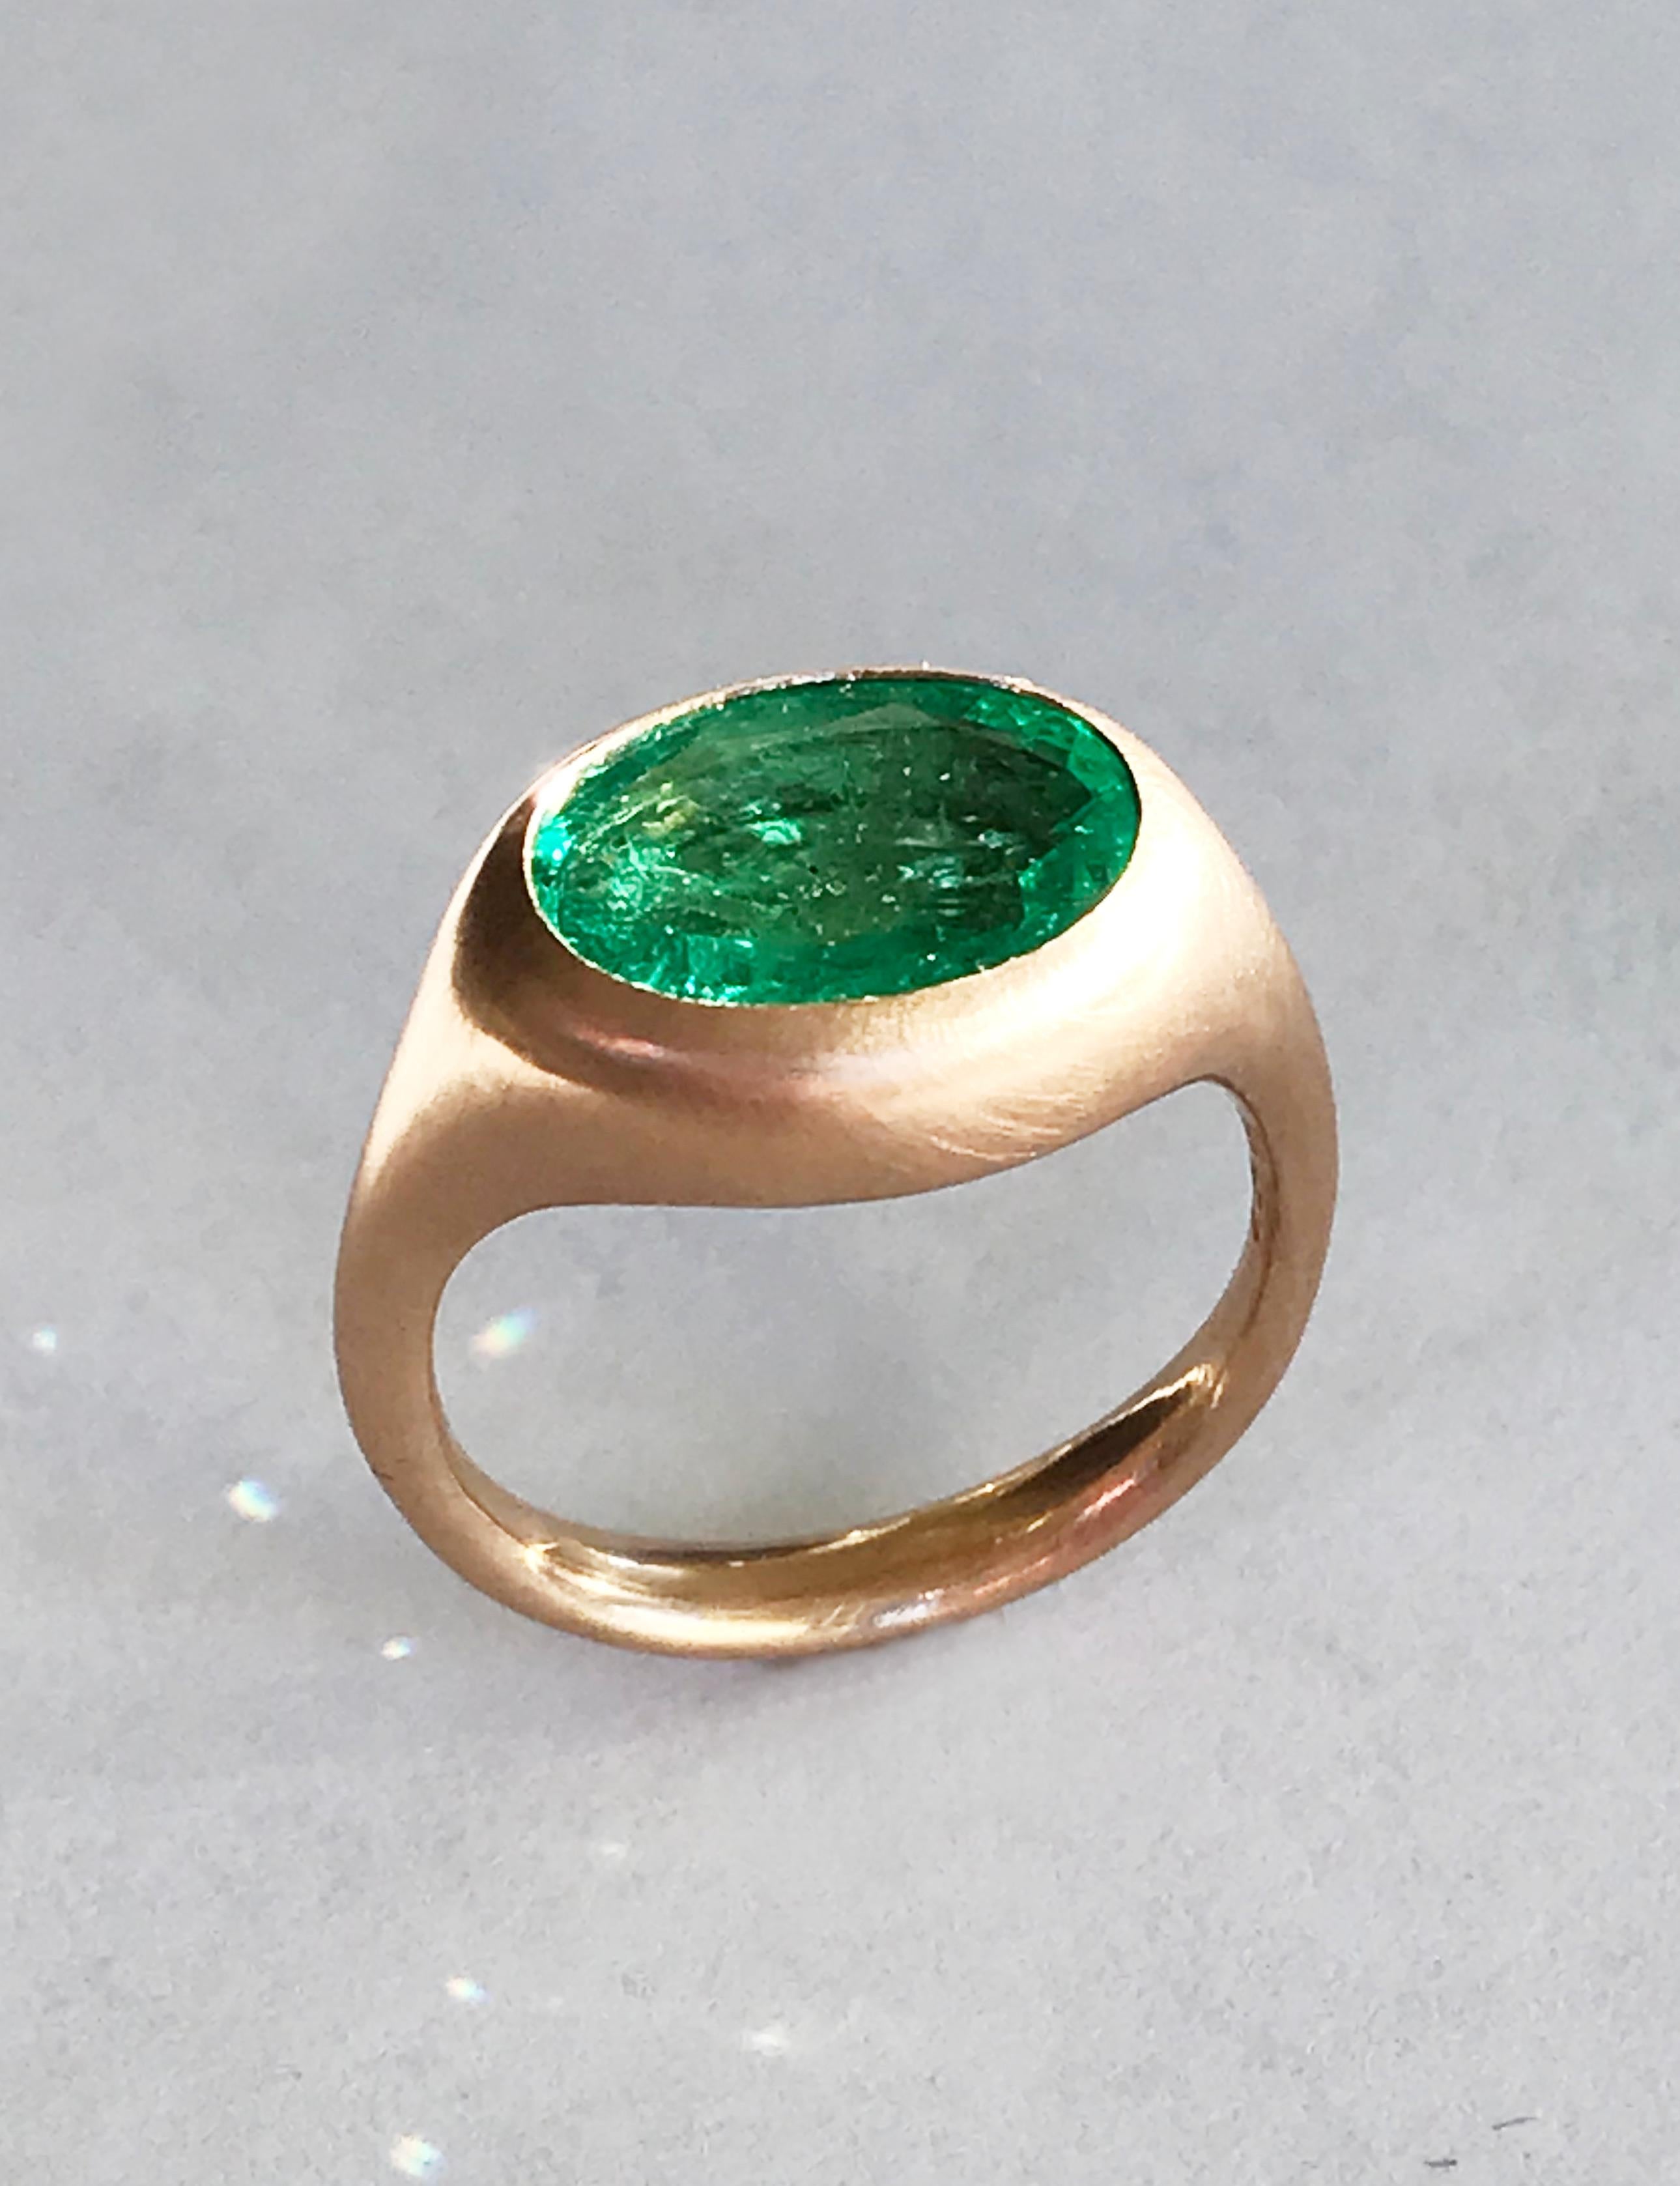 Dalben design One of a Kind 18k rose gold matte finishing ring with a light green 2,8 carat bezel-set oval faceted cut emerald. 
Ring size 6 1/4 USA - EU 52 re-sizable to most finger sizes. 
Bezel stone dimensions :
height 11,5 mm
width 15,2 mm
The